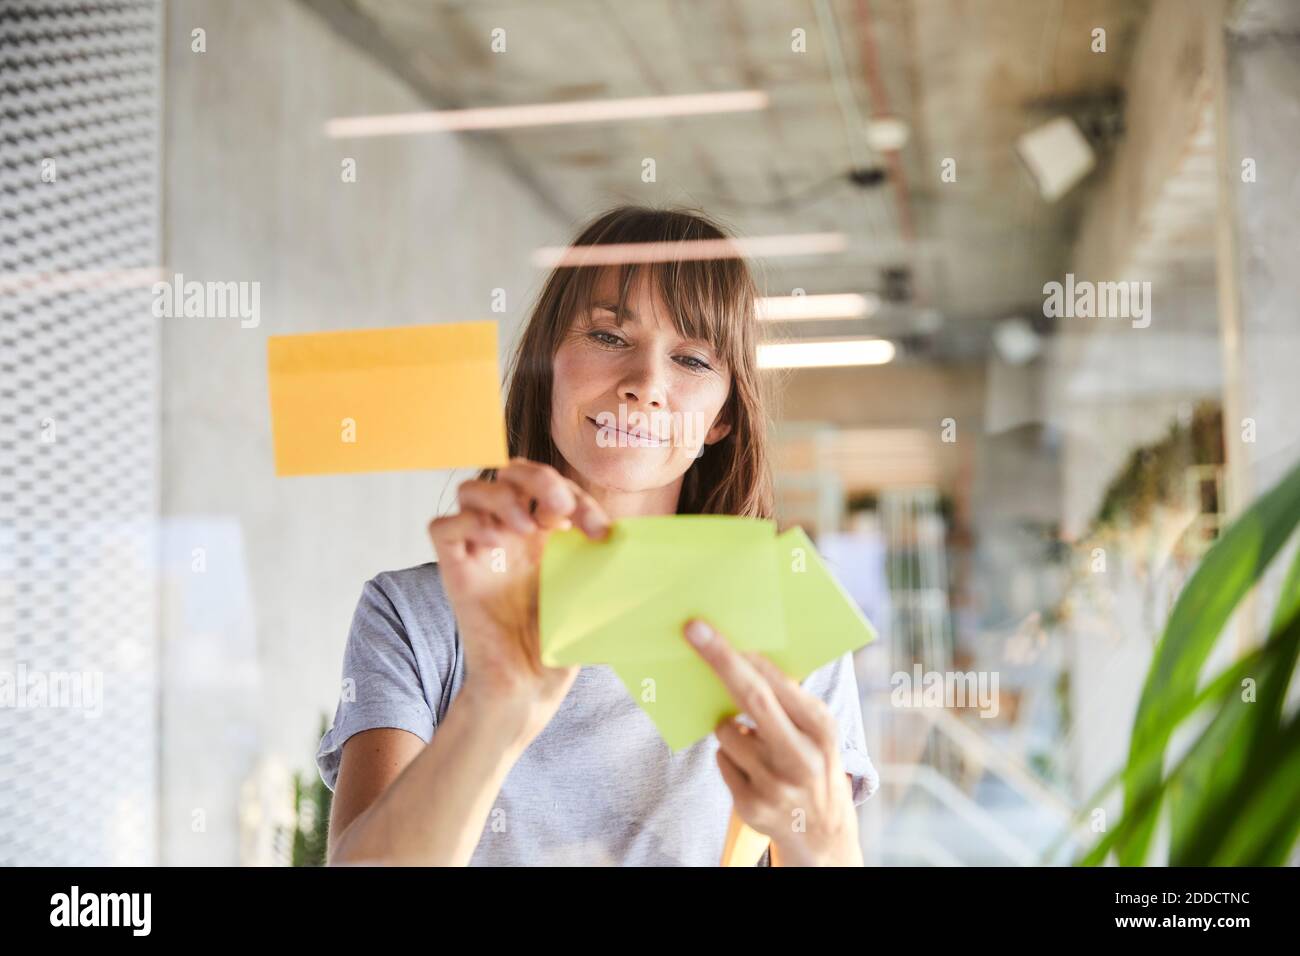 Mature woman sticking adhesive notes on glass material Stock Photo